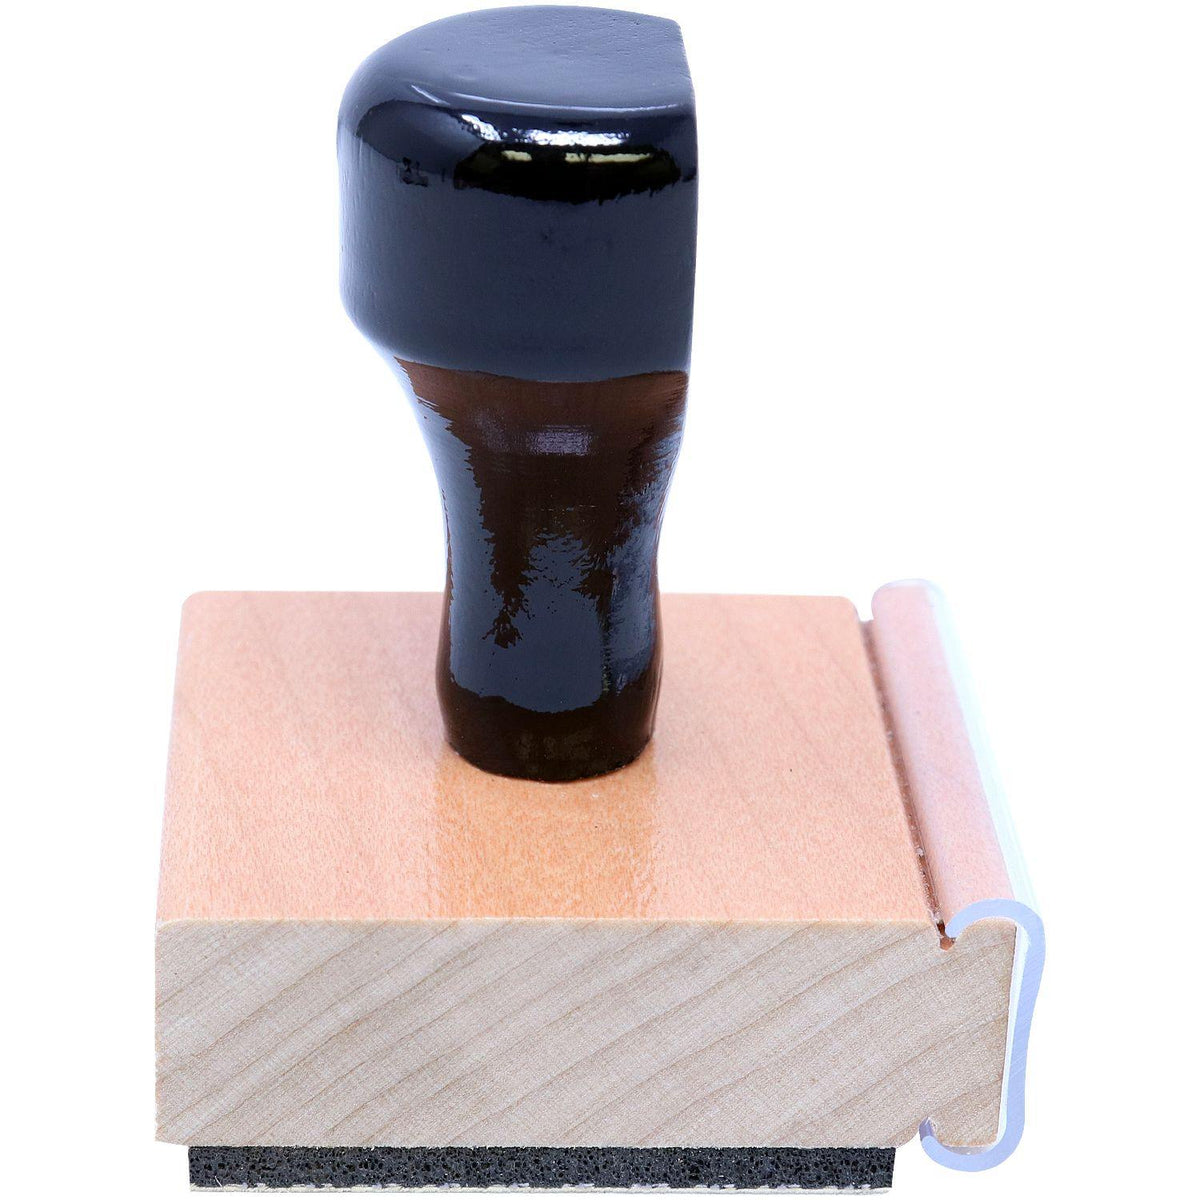 Real Estate Appraiser Regular Rubber Stamp of Seal - Engineer Seal Stamps - Stamp Type_Hand Stamp, Type of Use_Professional